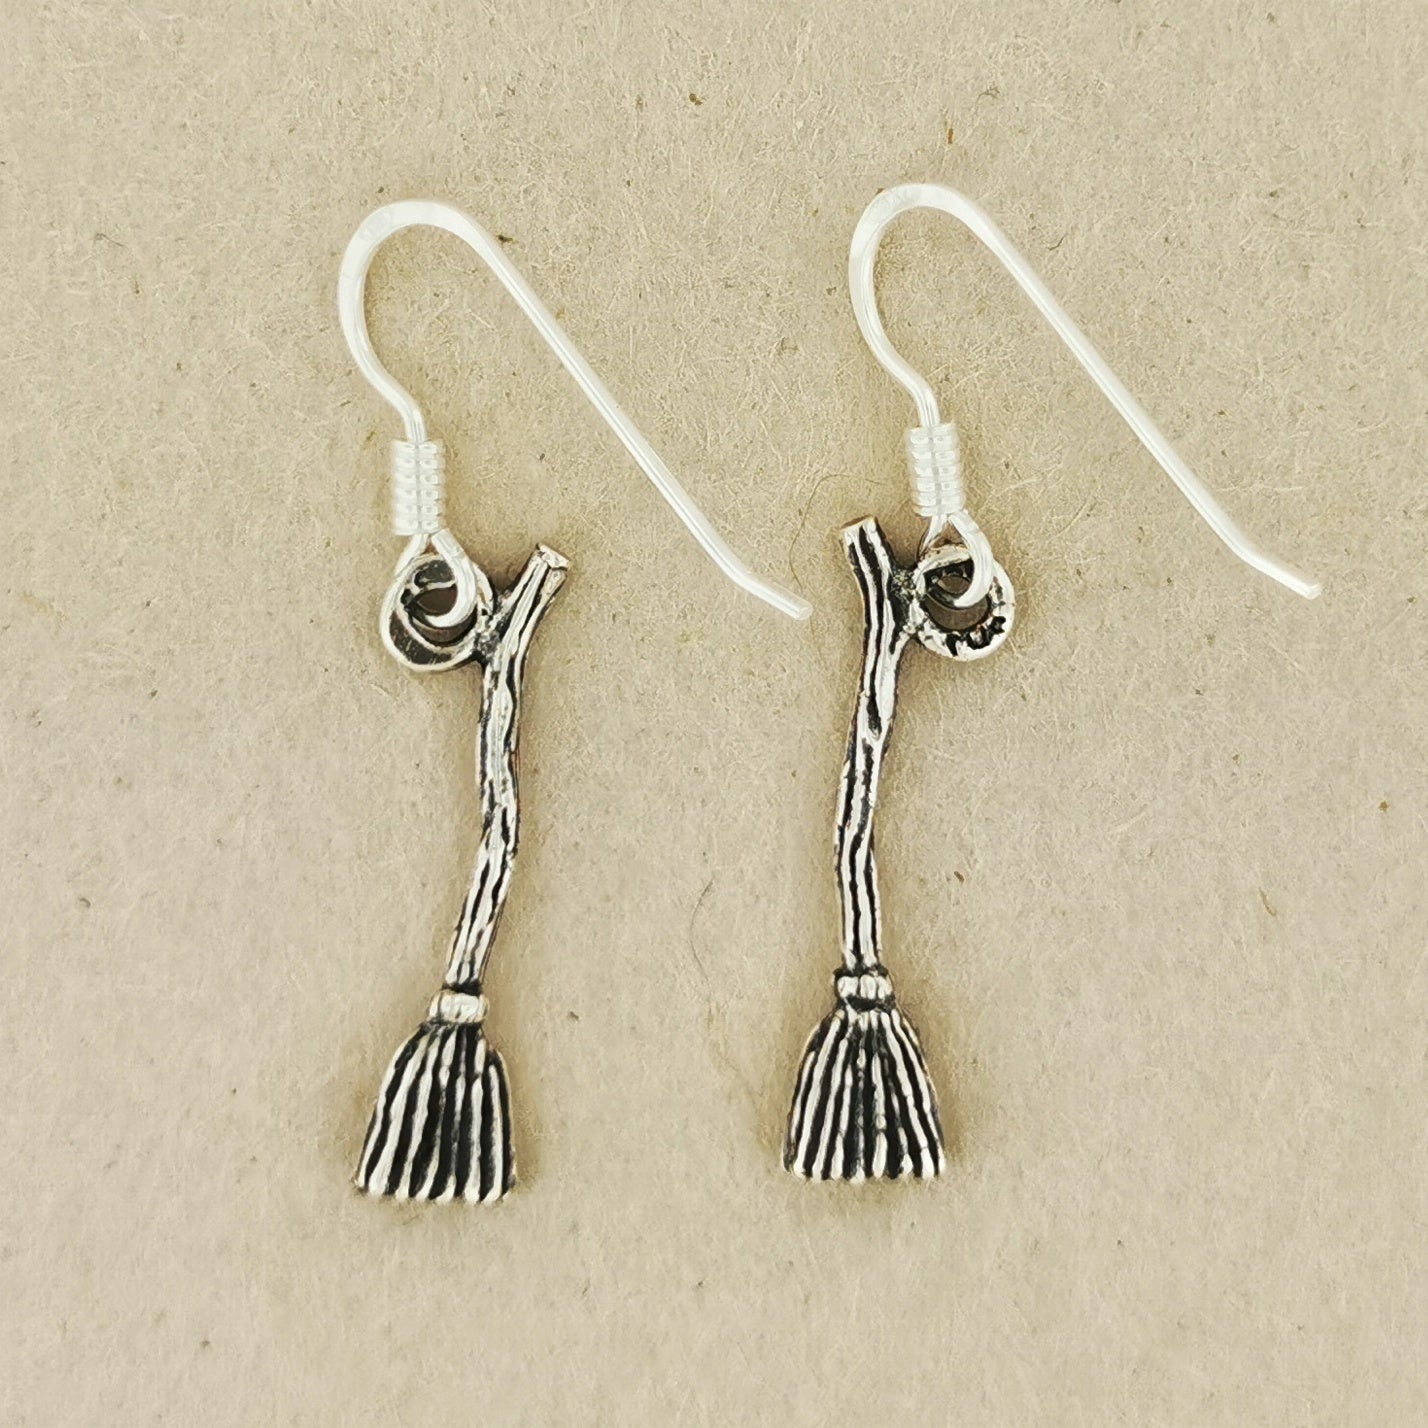 witches broom charm earrings, witchy earrings, witches broom earrings, silver broom earrings, silver witch earrings, silver pagan earrings, silver witchy earrings, broom charms, broom earrings in sterling silver, esoteric earrings, silver brooms, small witch earrings, witch's broom earrings